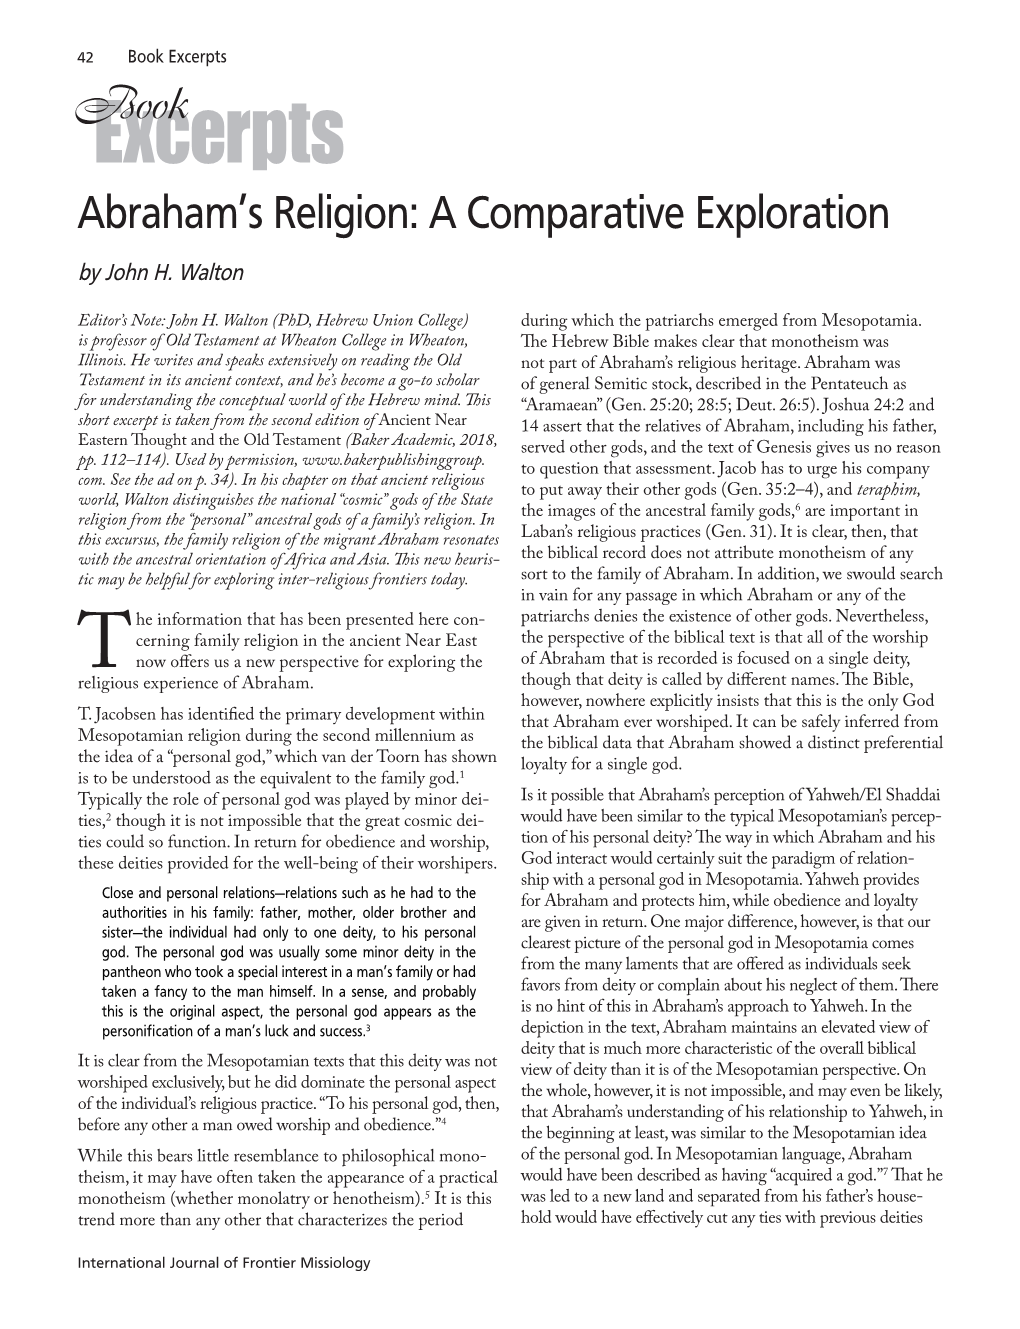 Book Excerpts Bookexcerpts Abraham’S Religion: a Comparative Exploration by John H